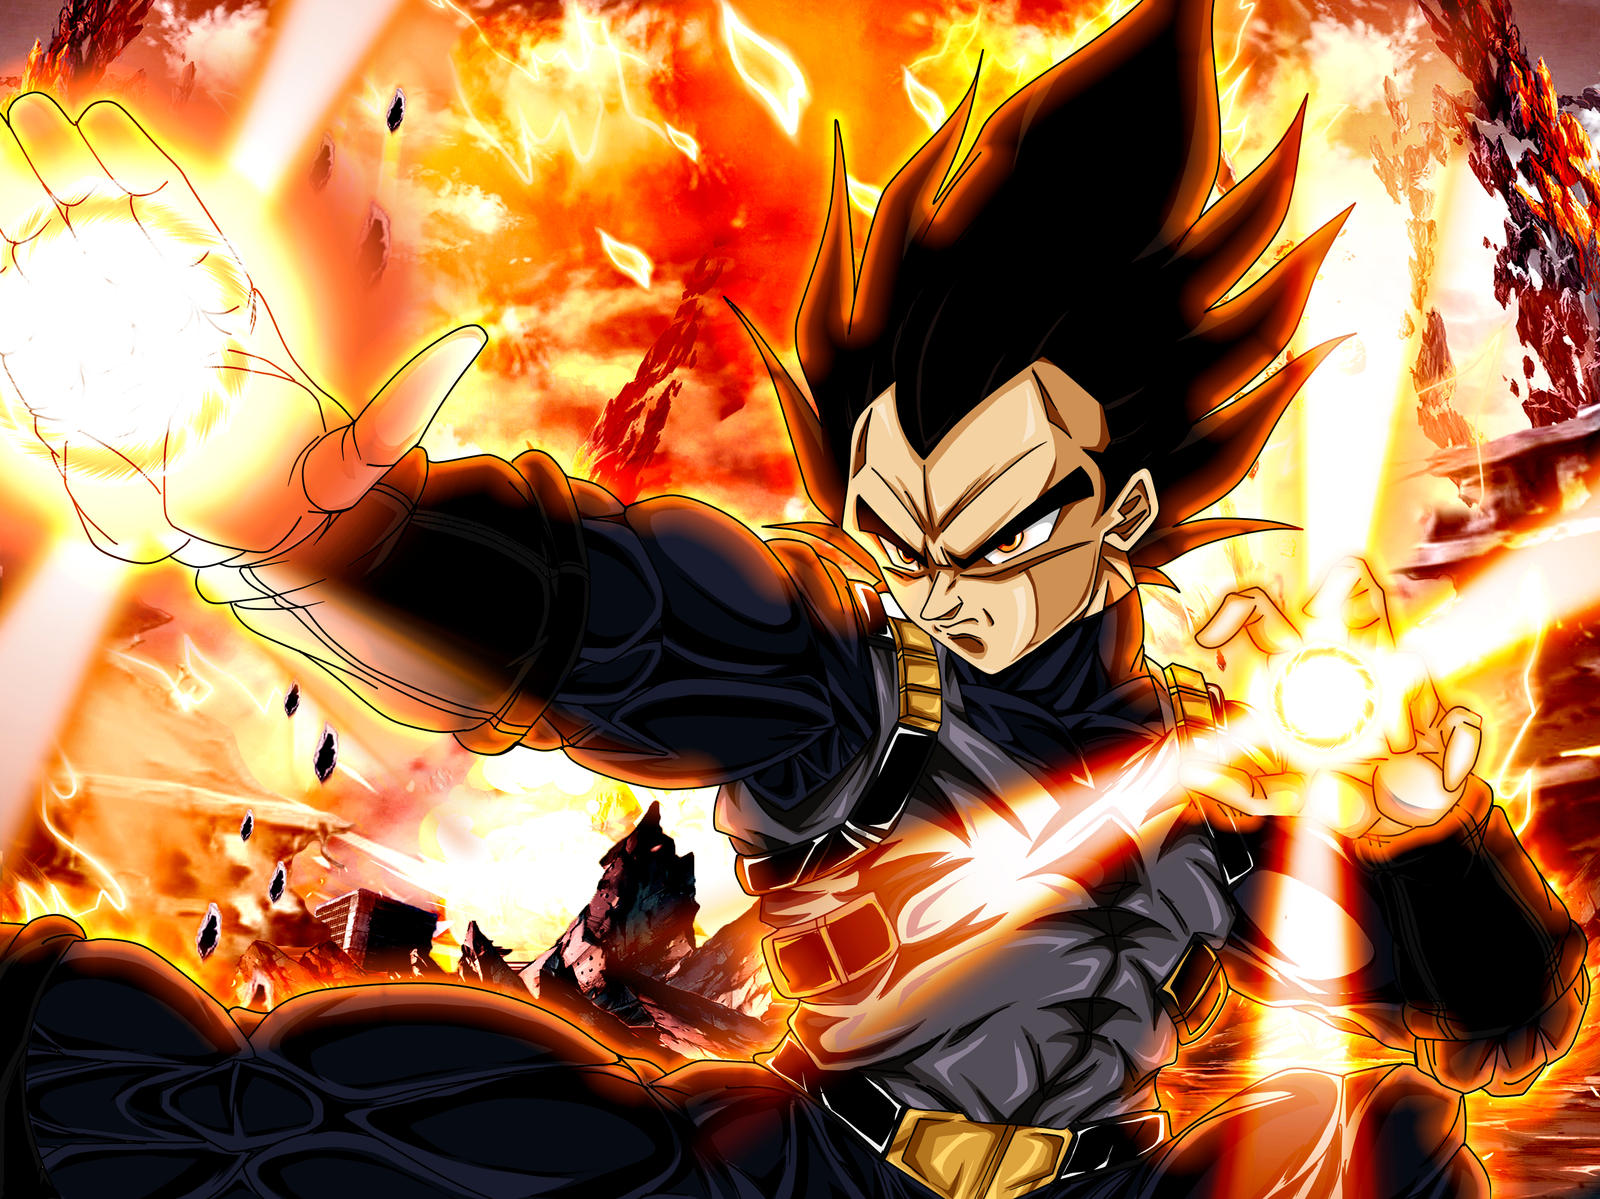 Flash, Animated GIFS and Wallpapers on Dragonball-Z-Club - DeviantArt